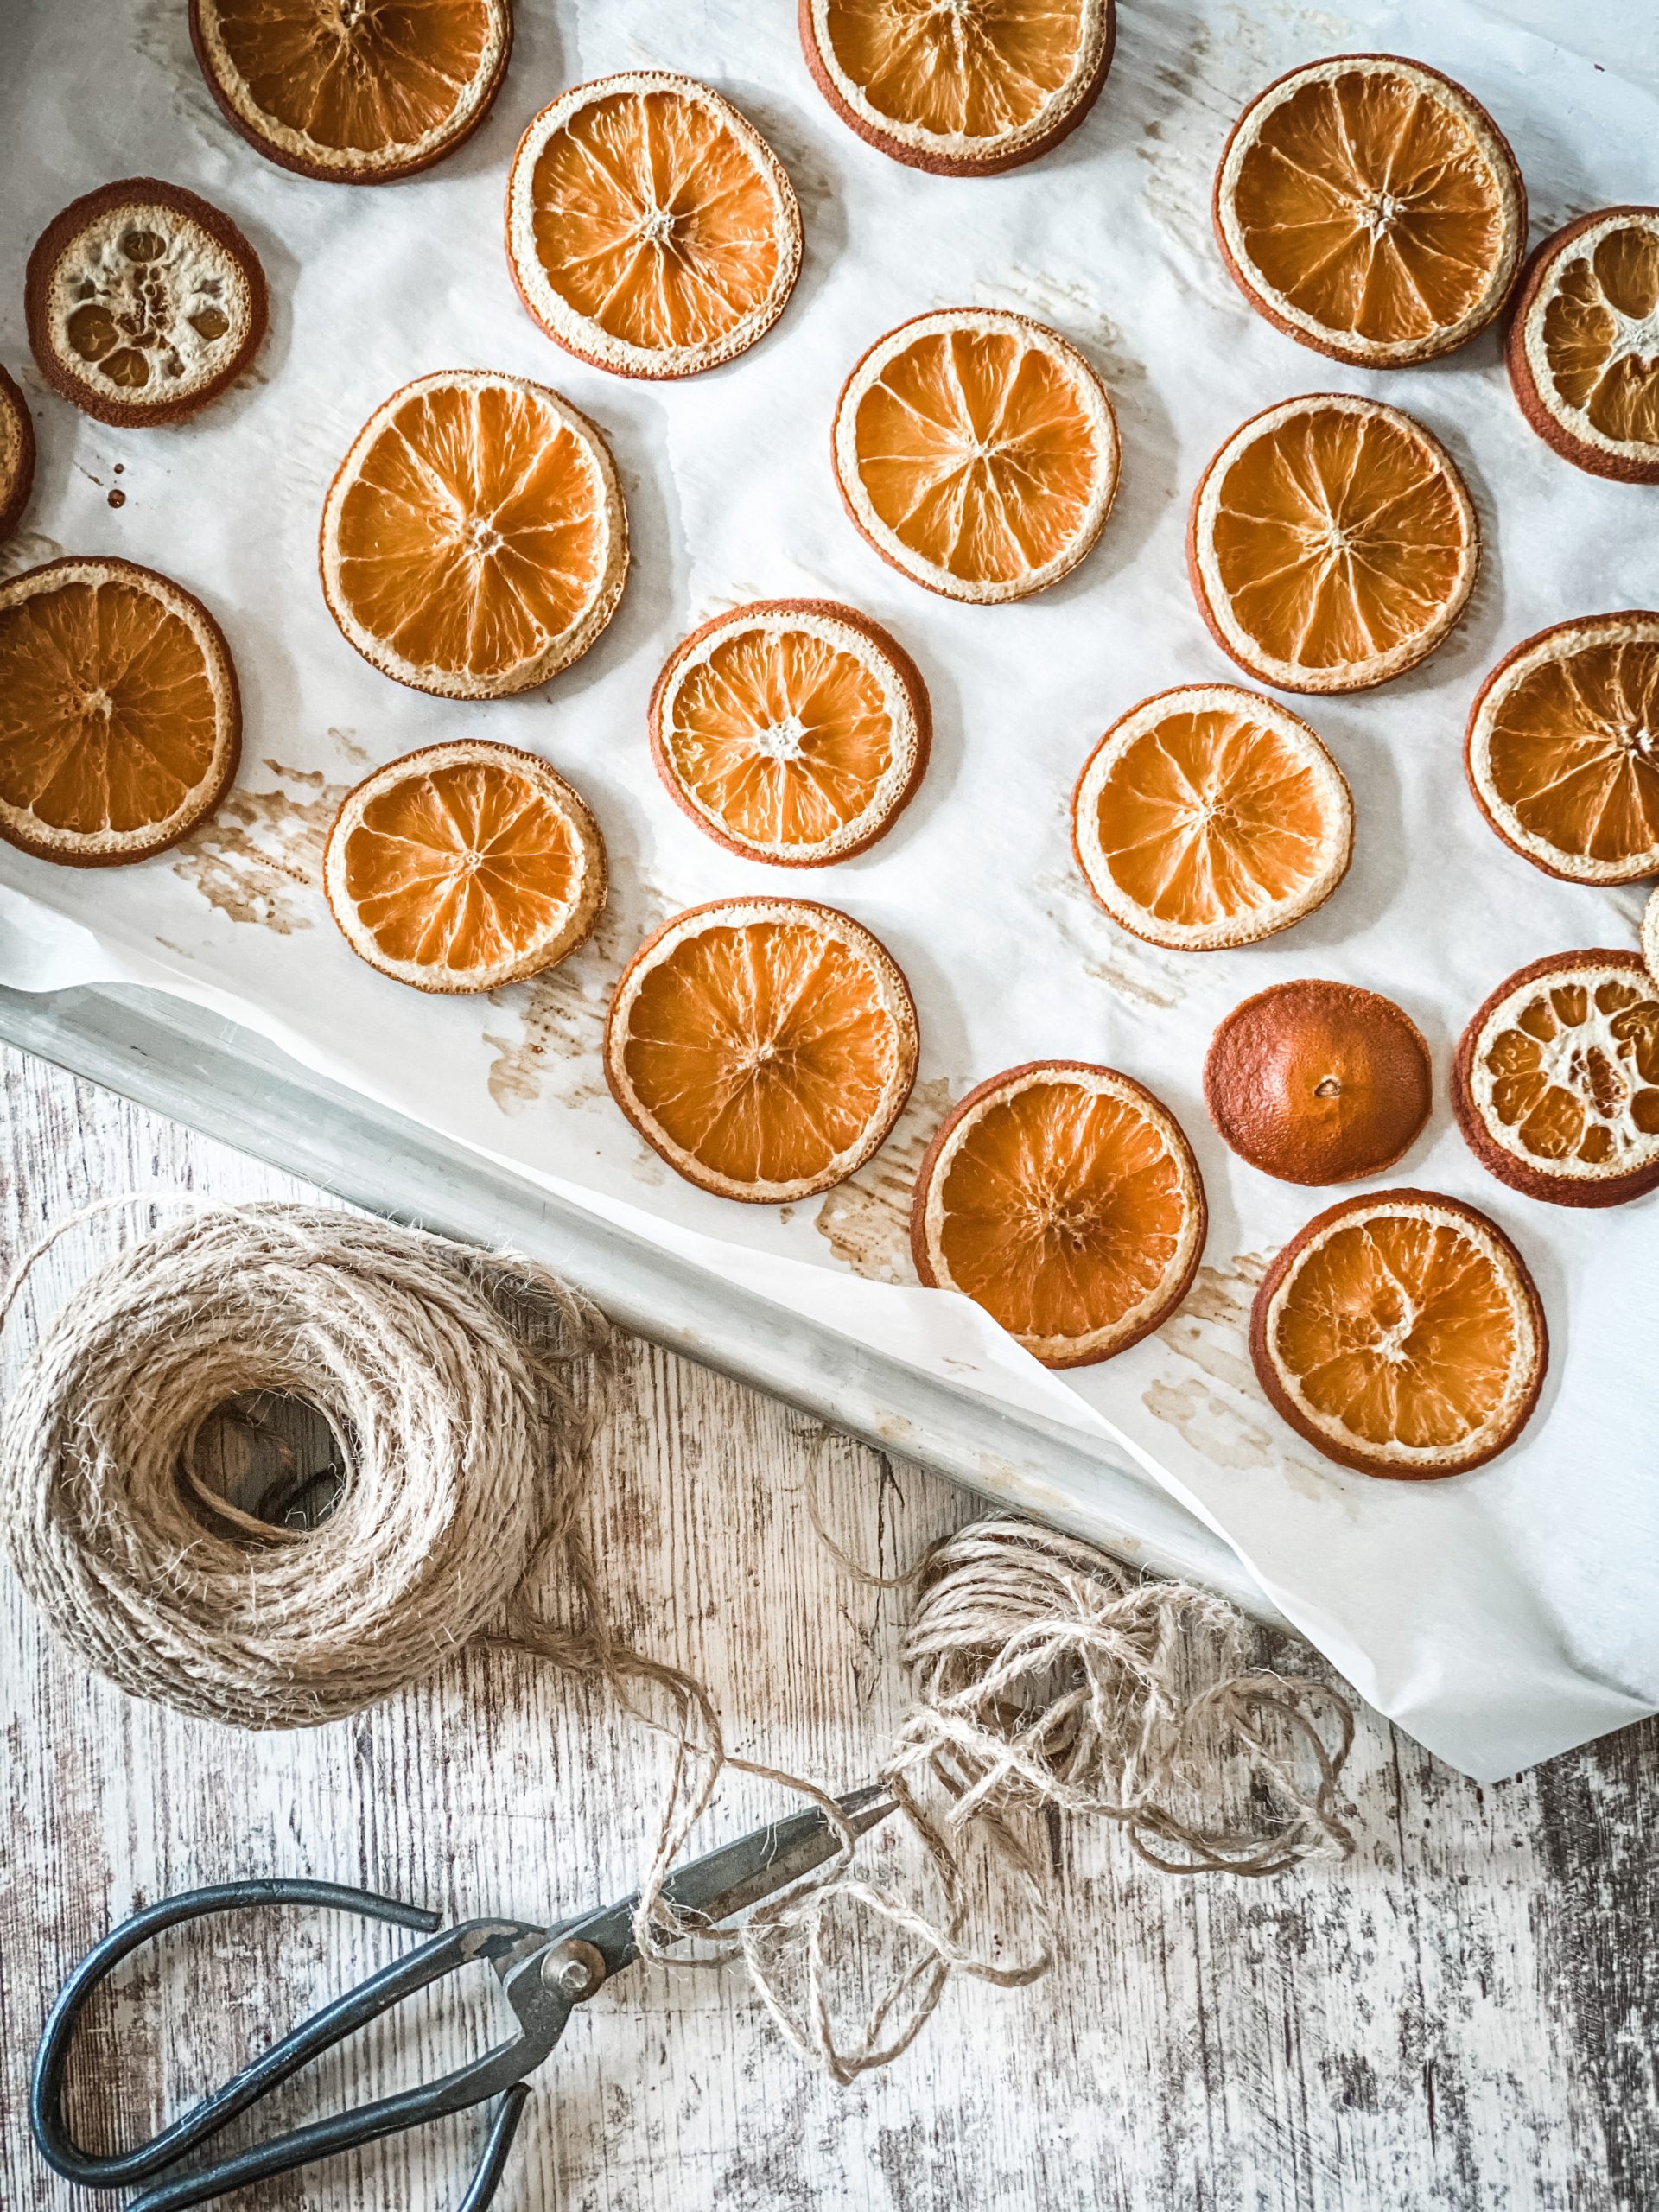 How to Make Dried Orange Slices  Dehydrator or Oven - The Home Intent